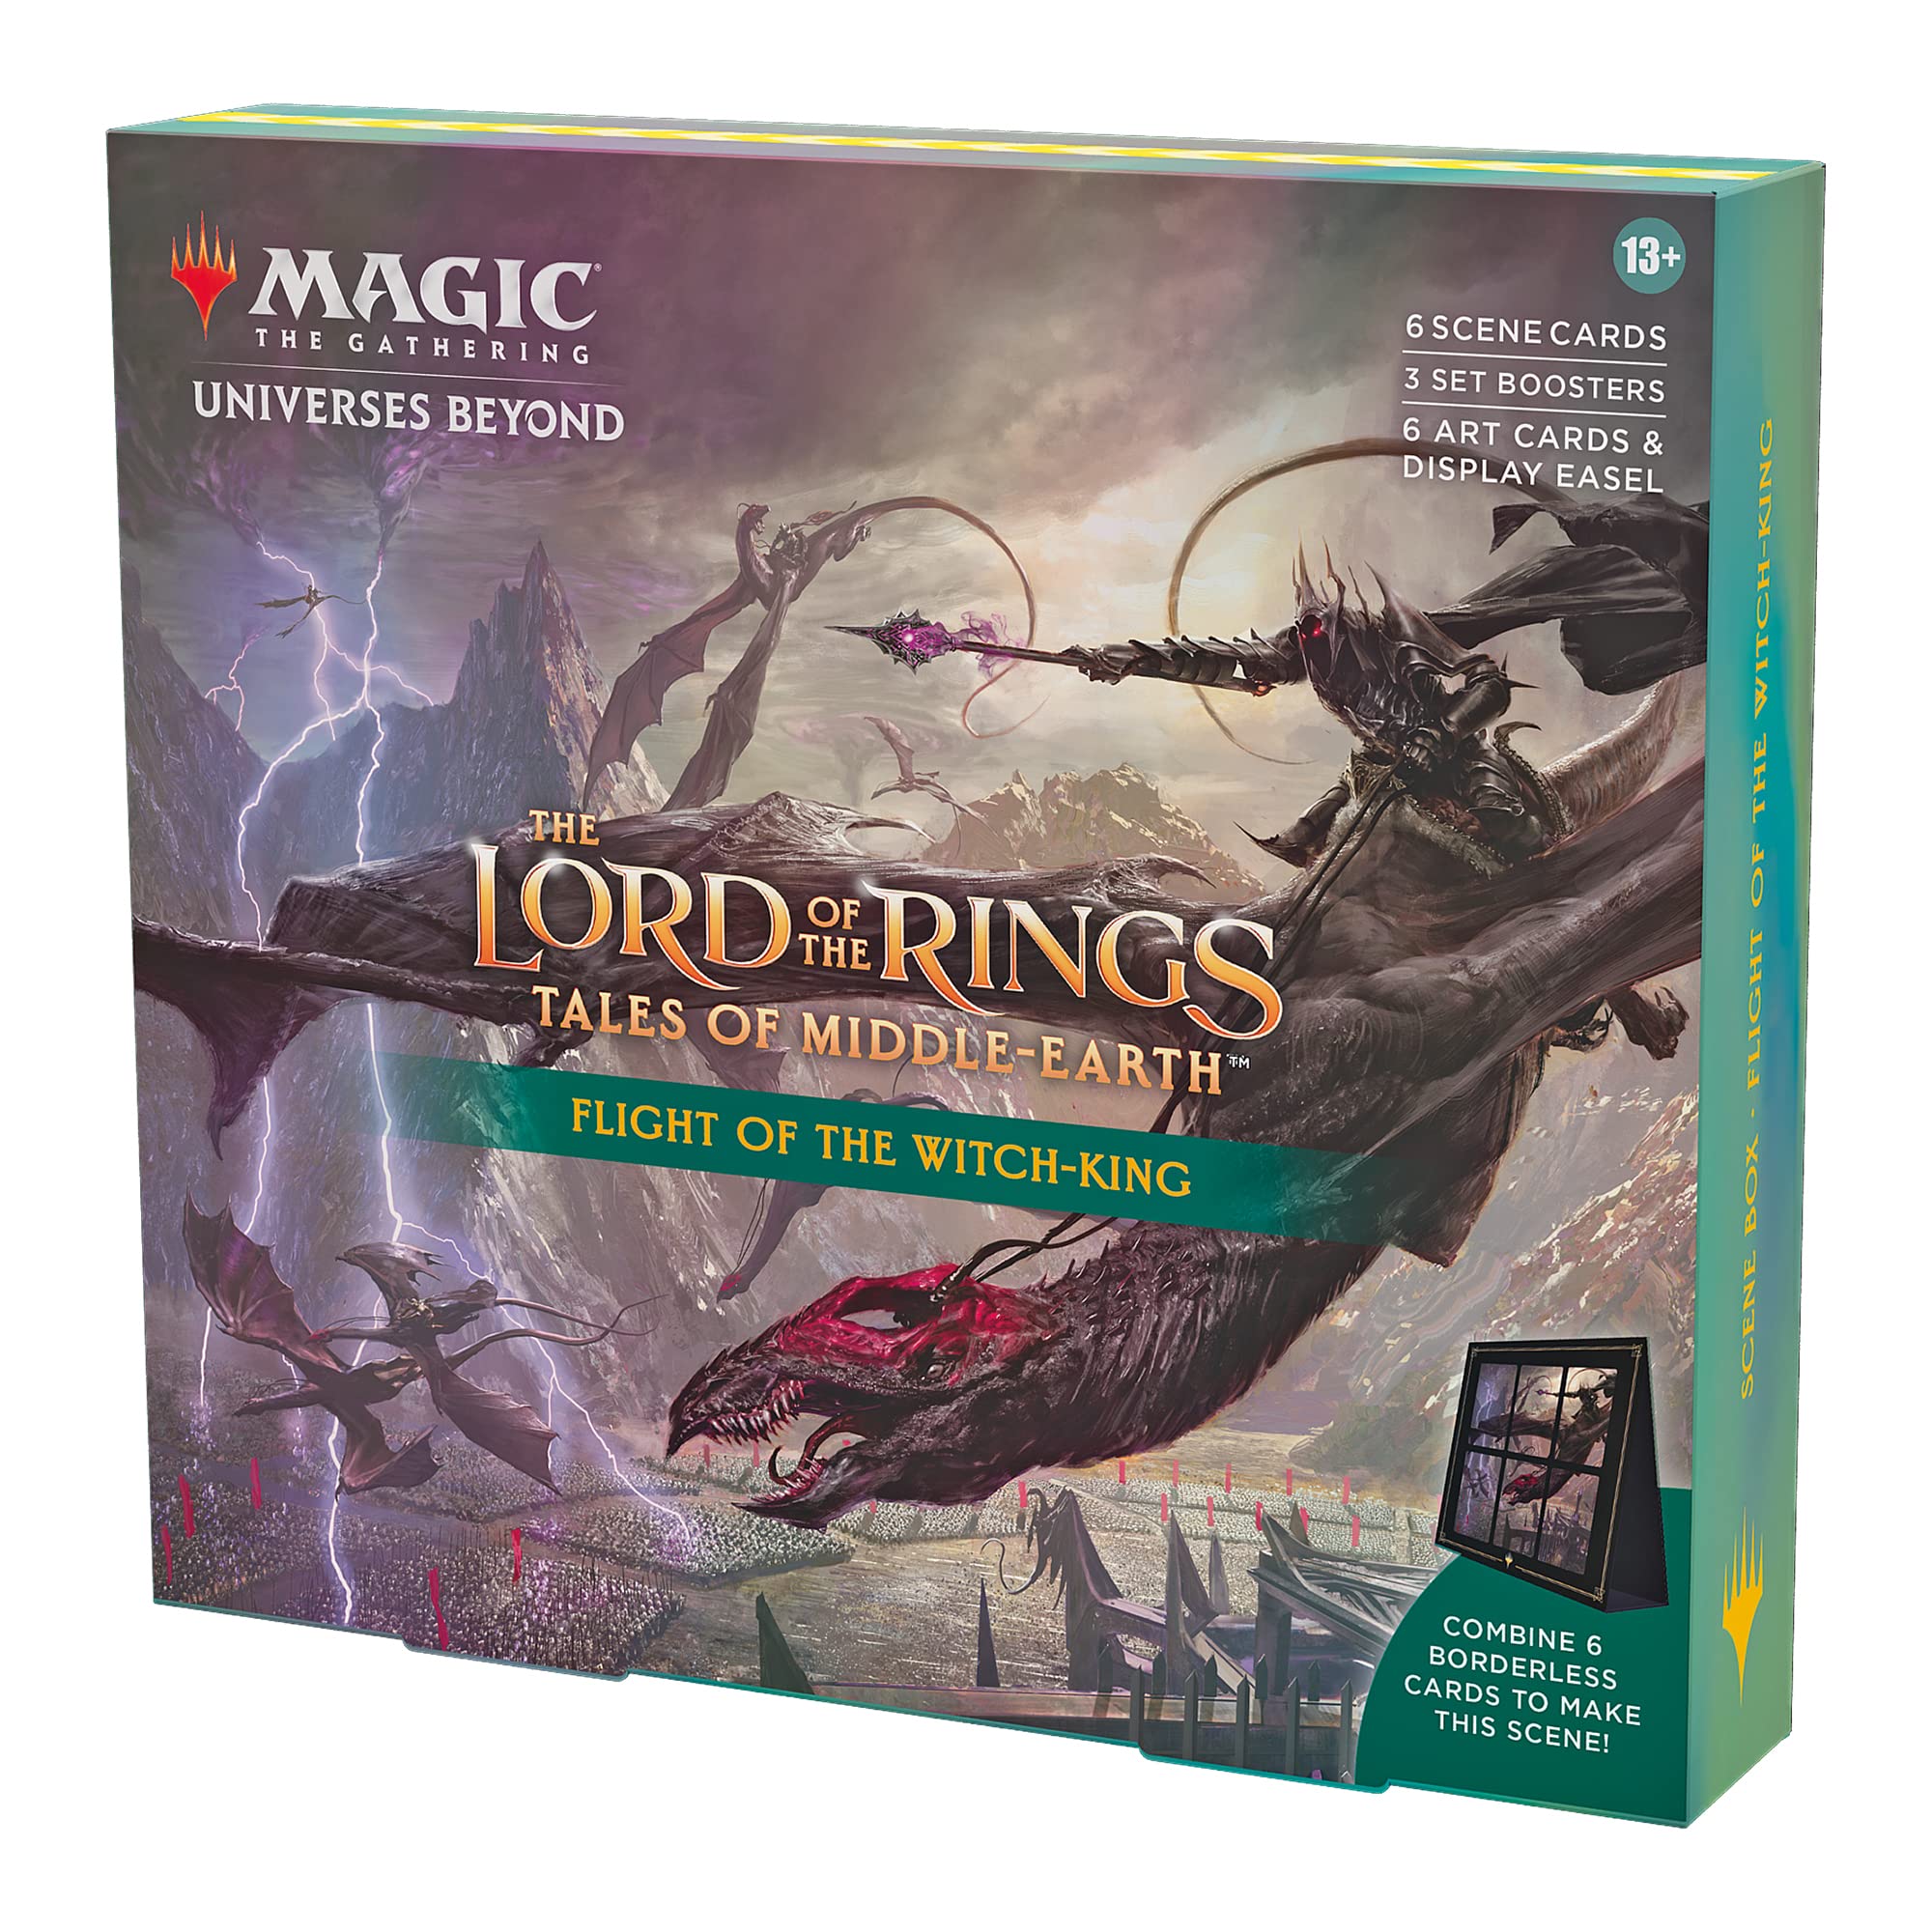 Magic The Gathering The Lord of The Rings: Tales of Middle-Earth Scene Box - Flight of The Witch-King (6 Scene Cards, 6 Art Cards, 3 Set Boosters + Display Easel)